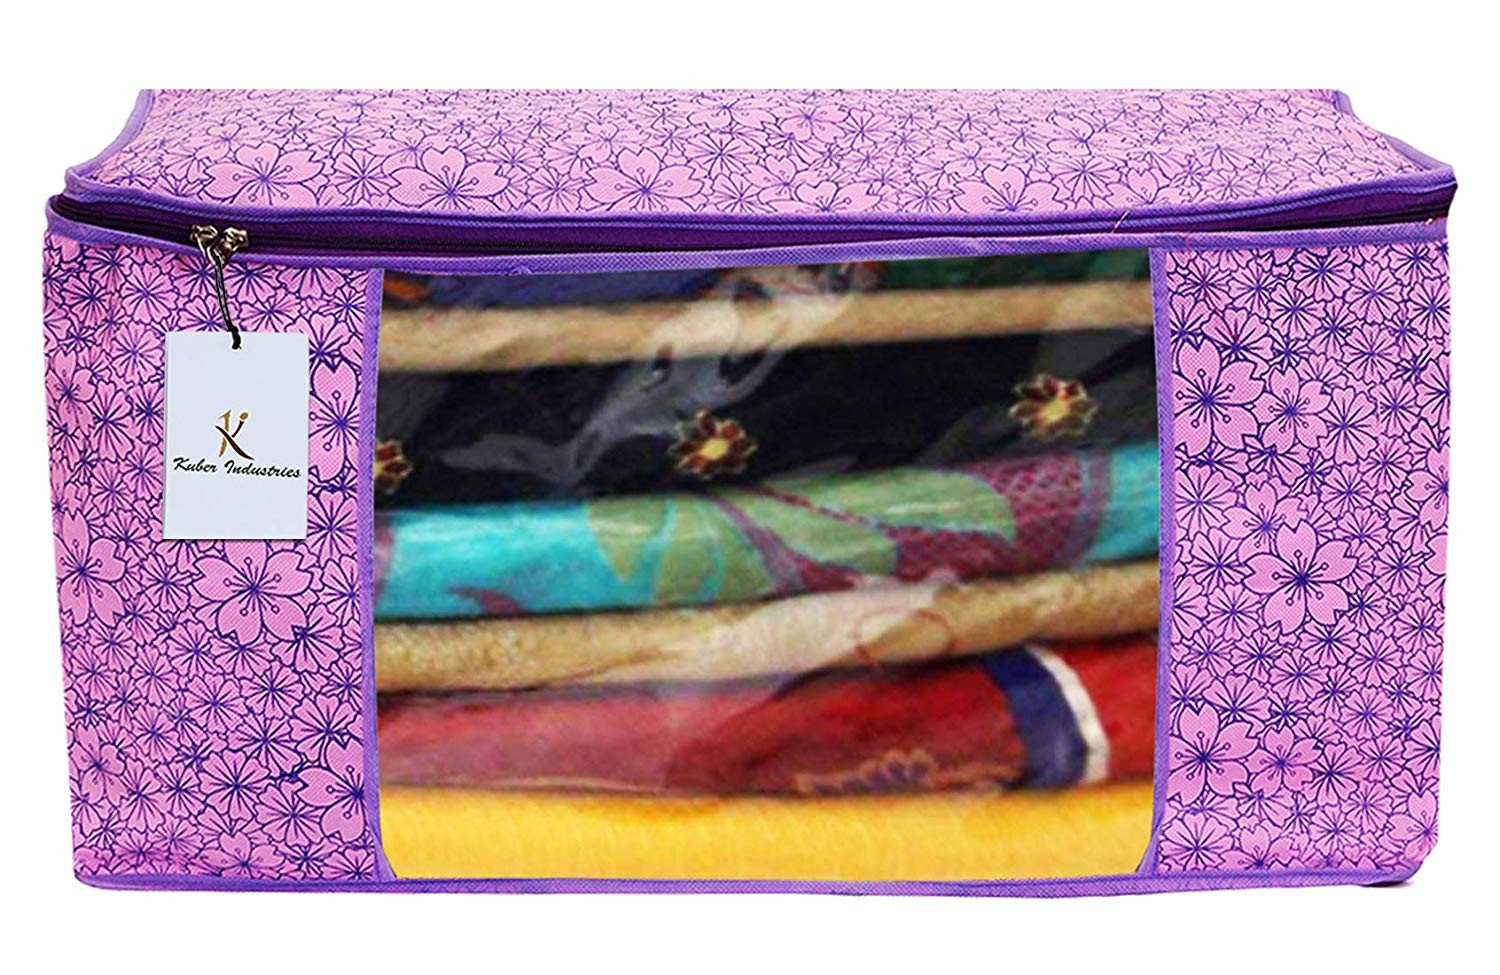 Kuber Industries Metallic Printed Non Woven Saree Cover And Underbed Storage Bag, Cloth Organizer For Storage, Blanket Cover Combo Set (Pink & Purple) -CTKTC38571